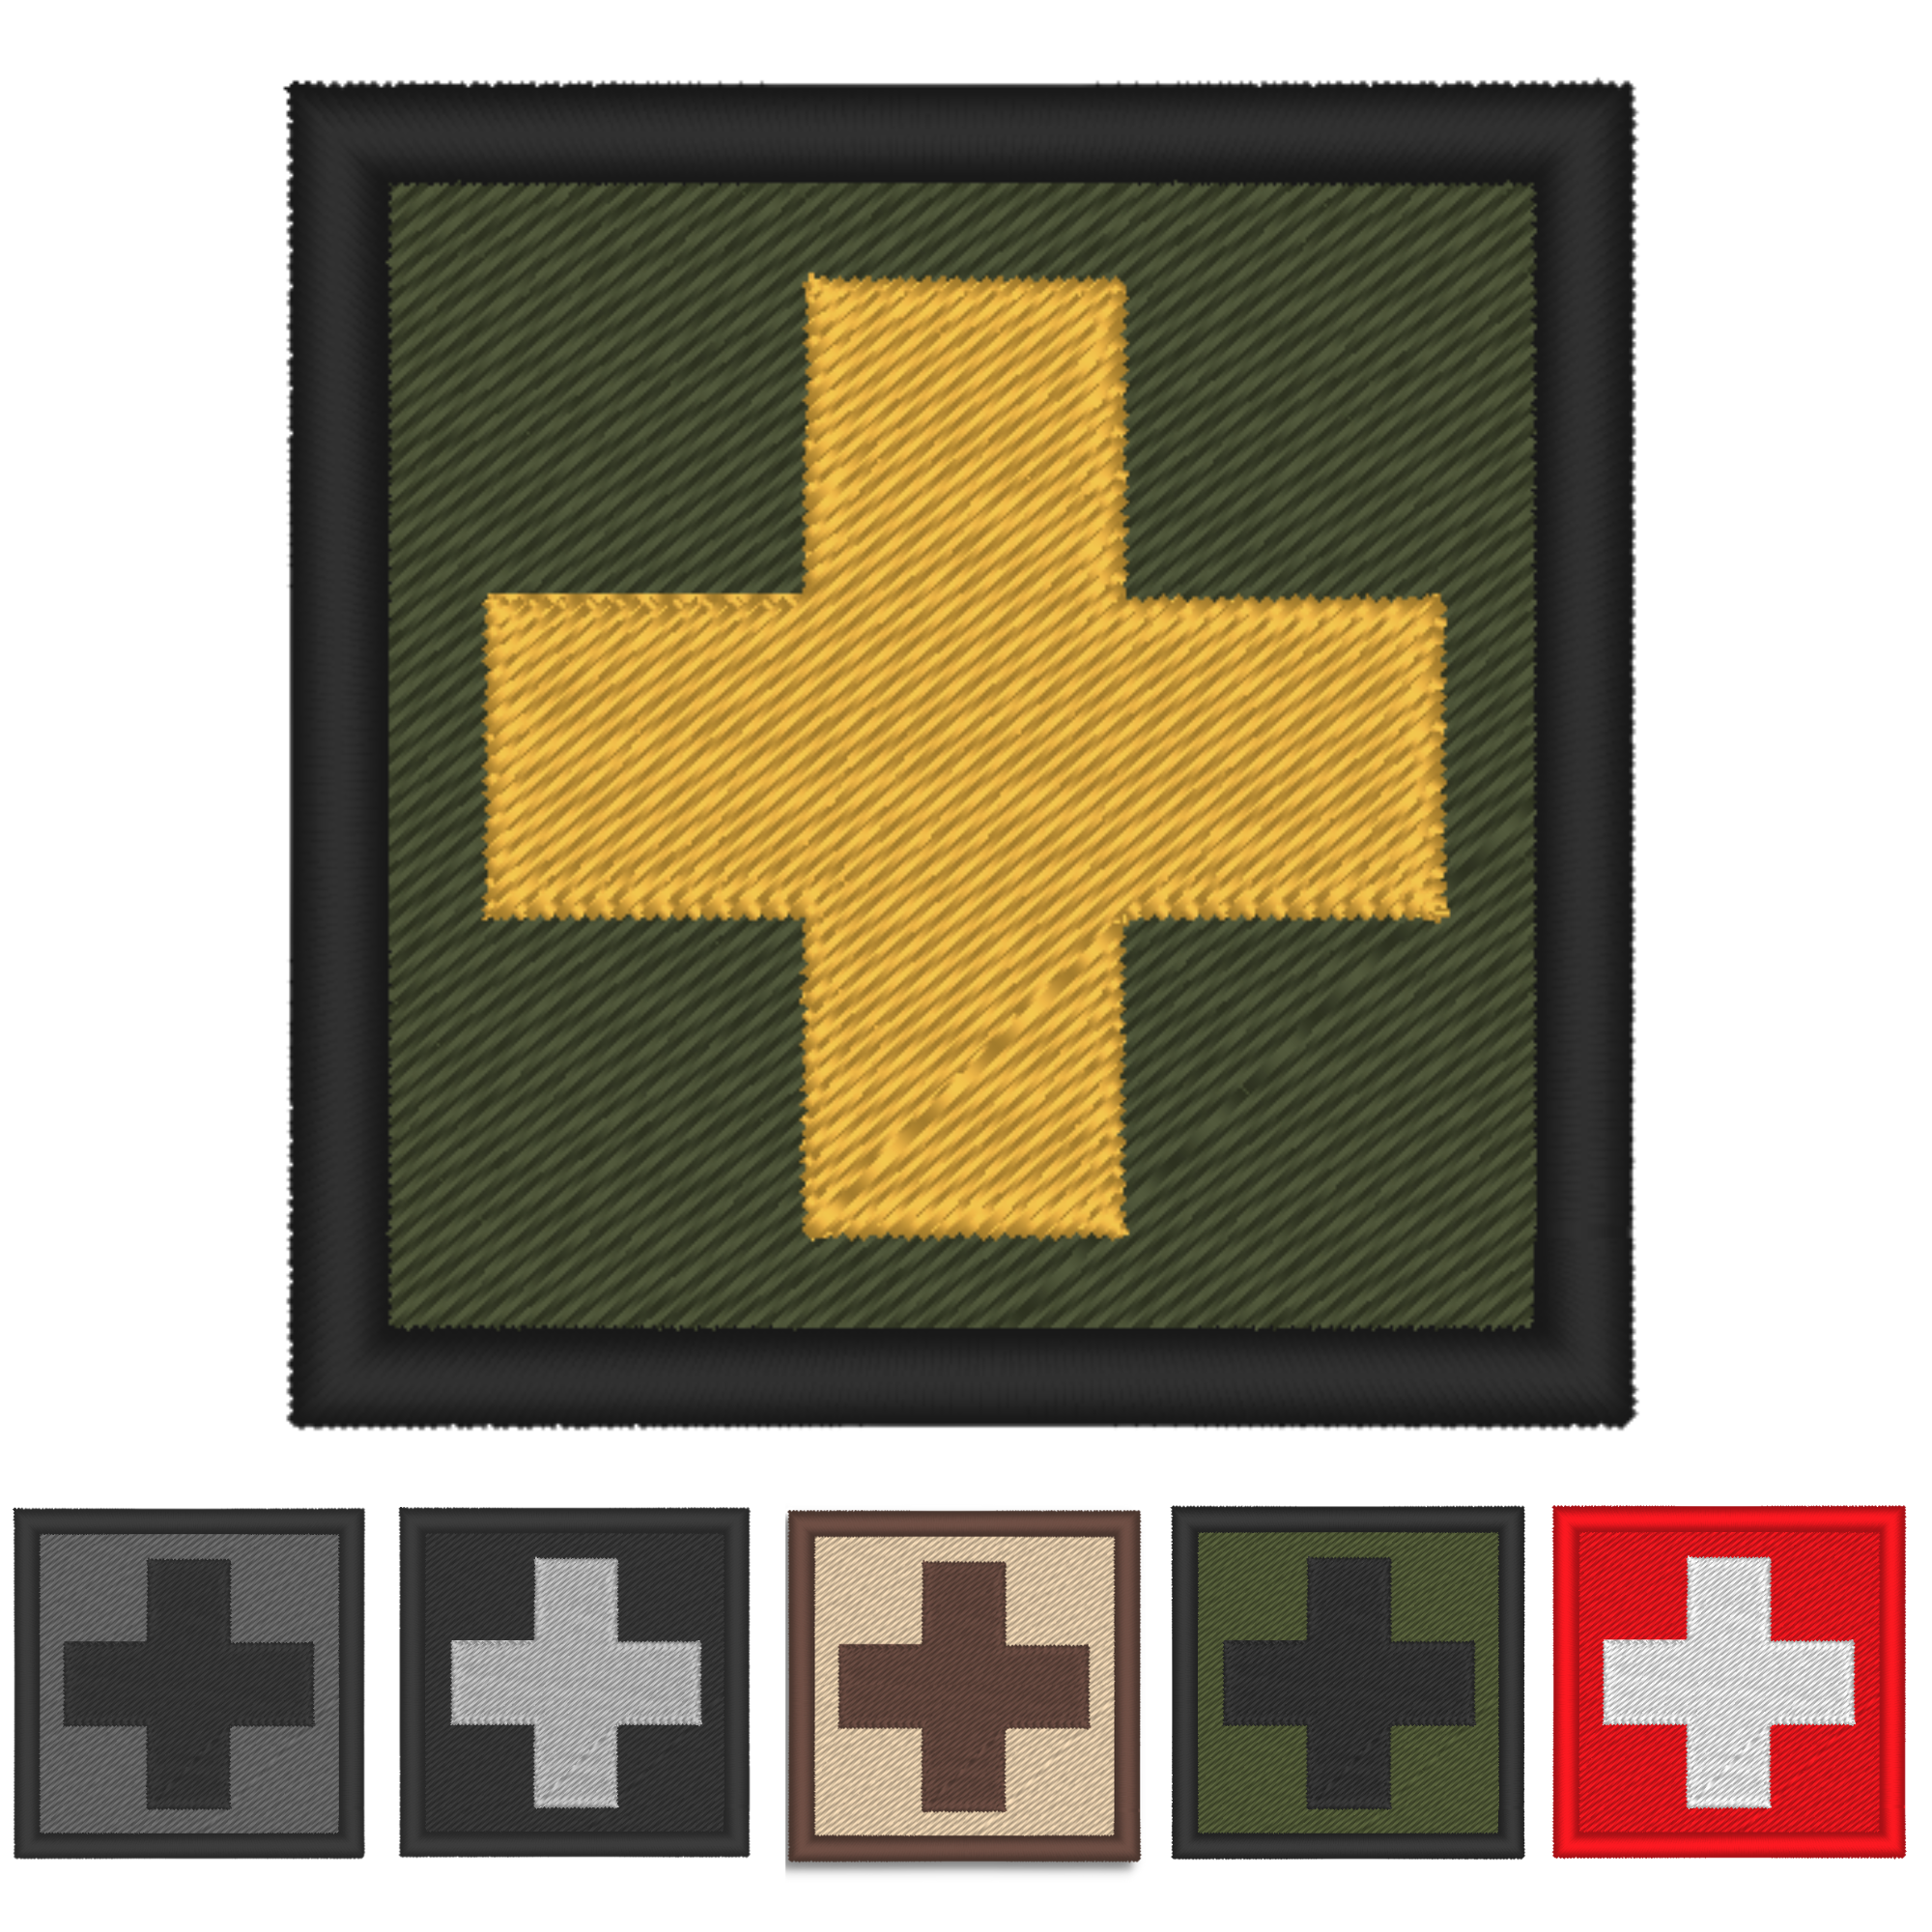 MEDIC military embroidered patch green/brown with velcro